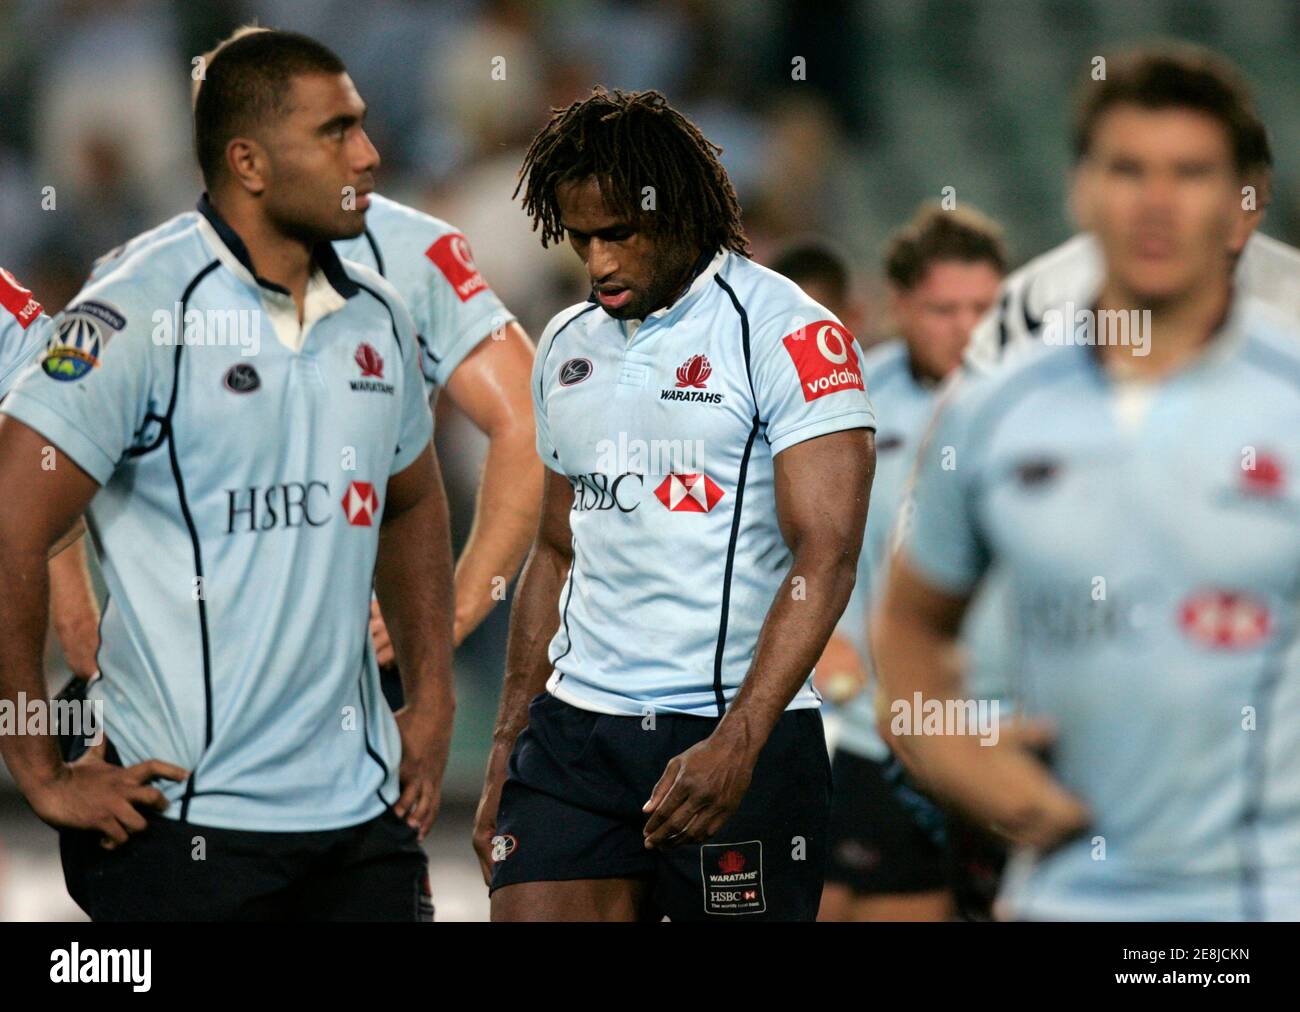 Lote Tuqiri of NSW Waratahs from Australia (C) reacts after his team's 32-19 loss to the Bulls from South Africa in their Super 14 rugby match in Sydney March 10, 2007. REUTERS/Will Burgess   (AUSTRALIA) Stock Photo